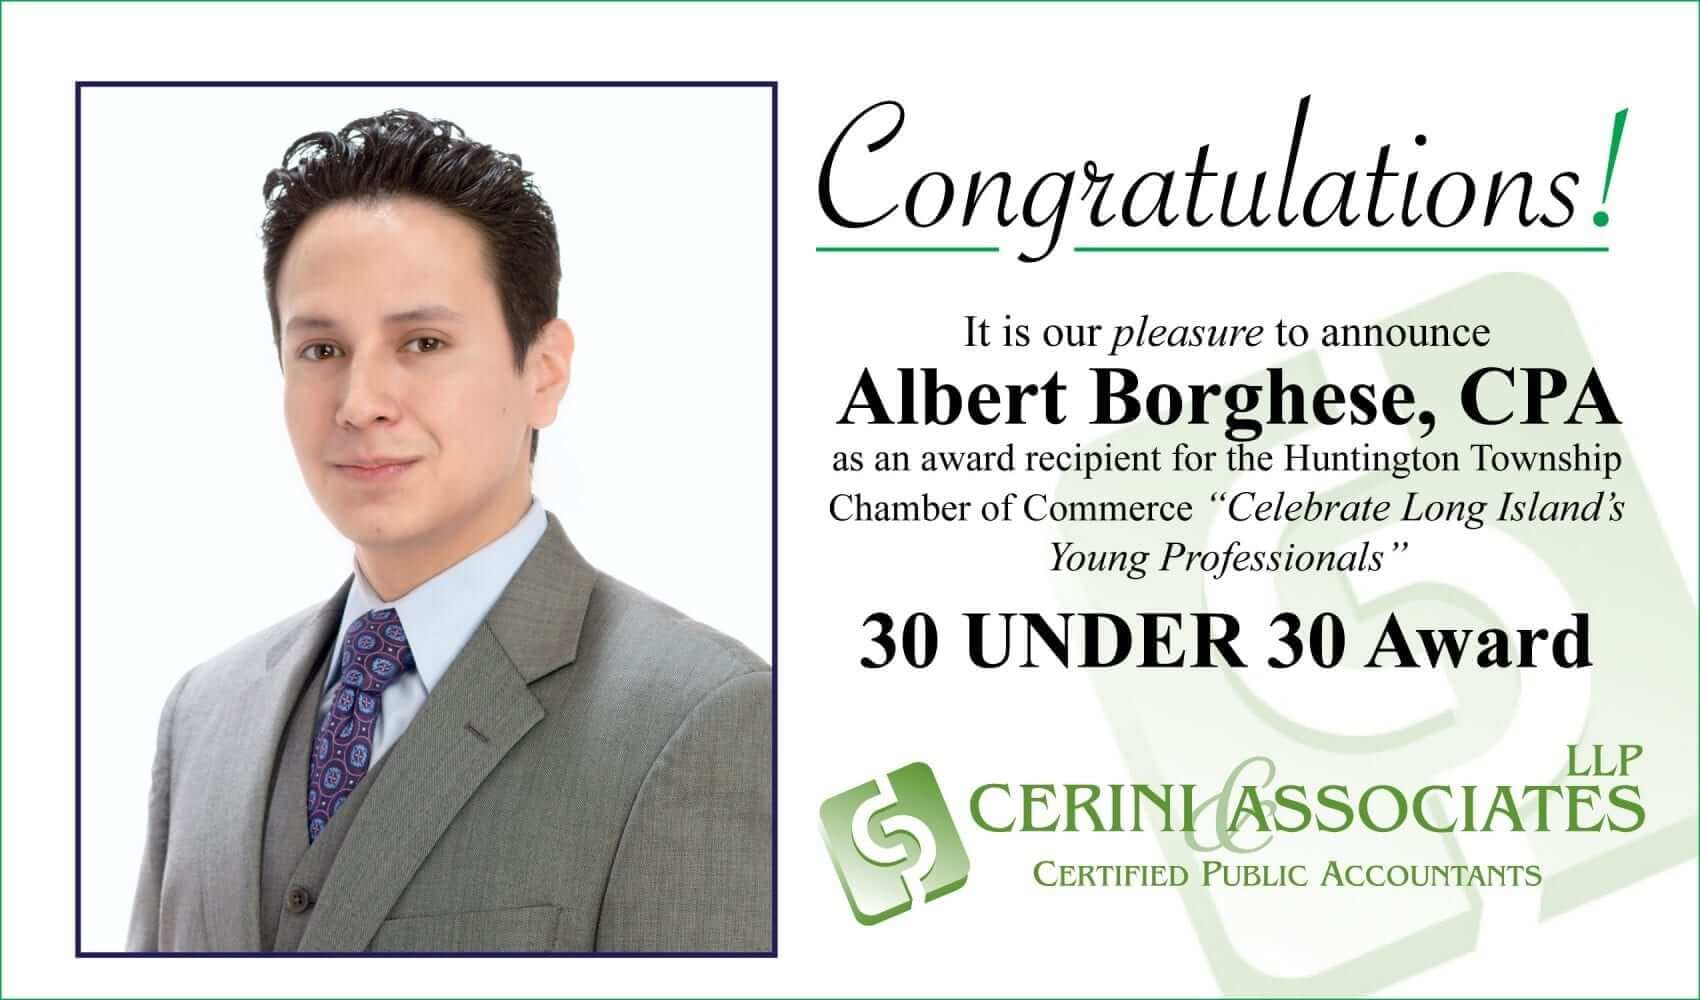 Albert Borghese, CPA, Supervisor Recognized for the 30 Under 30 Award